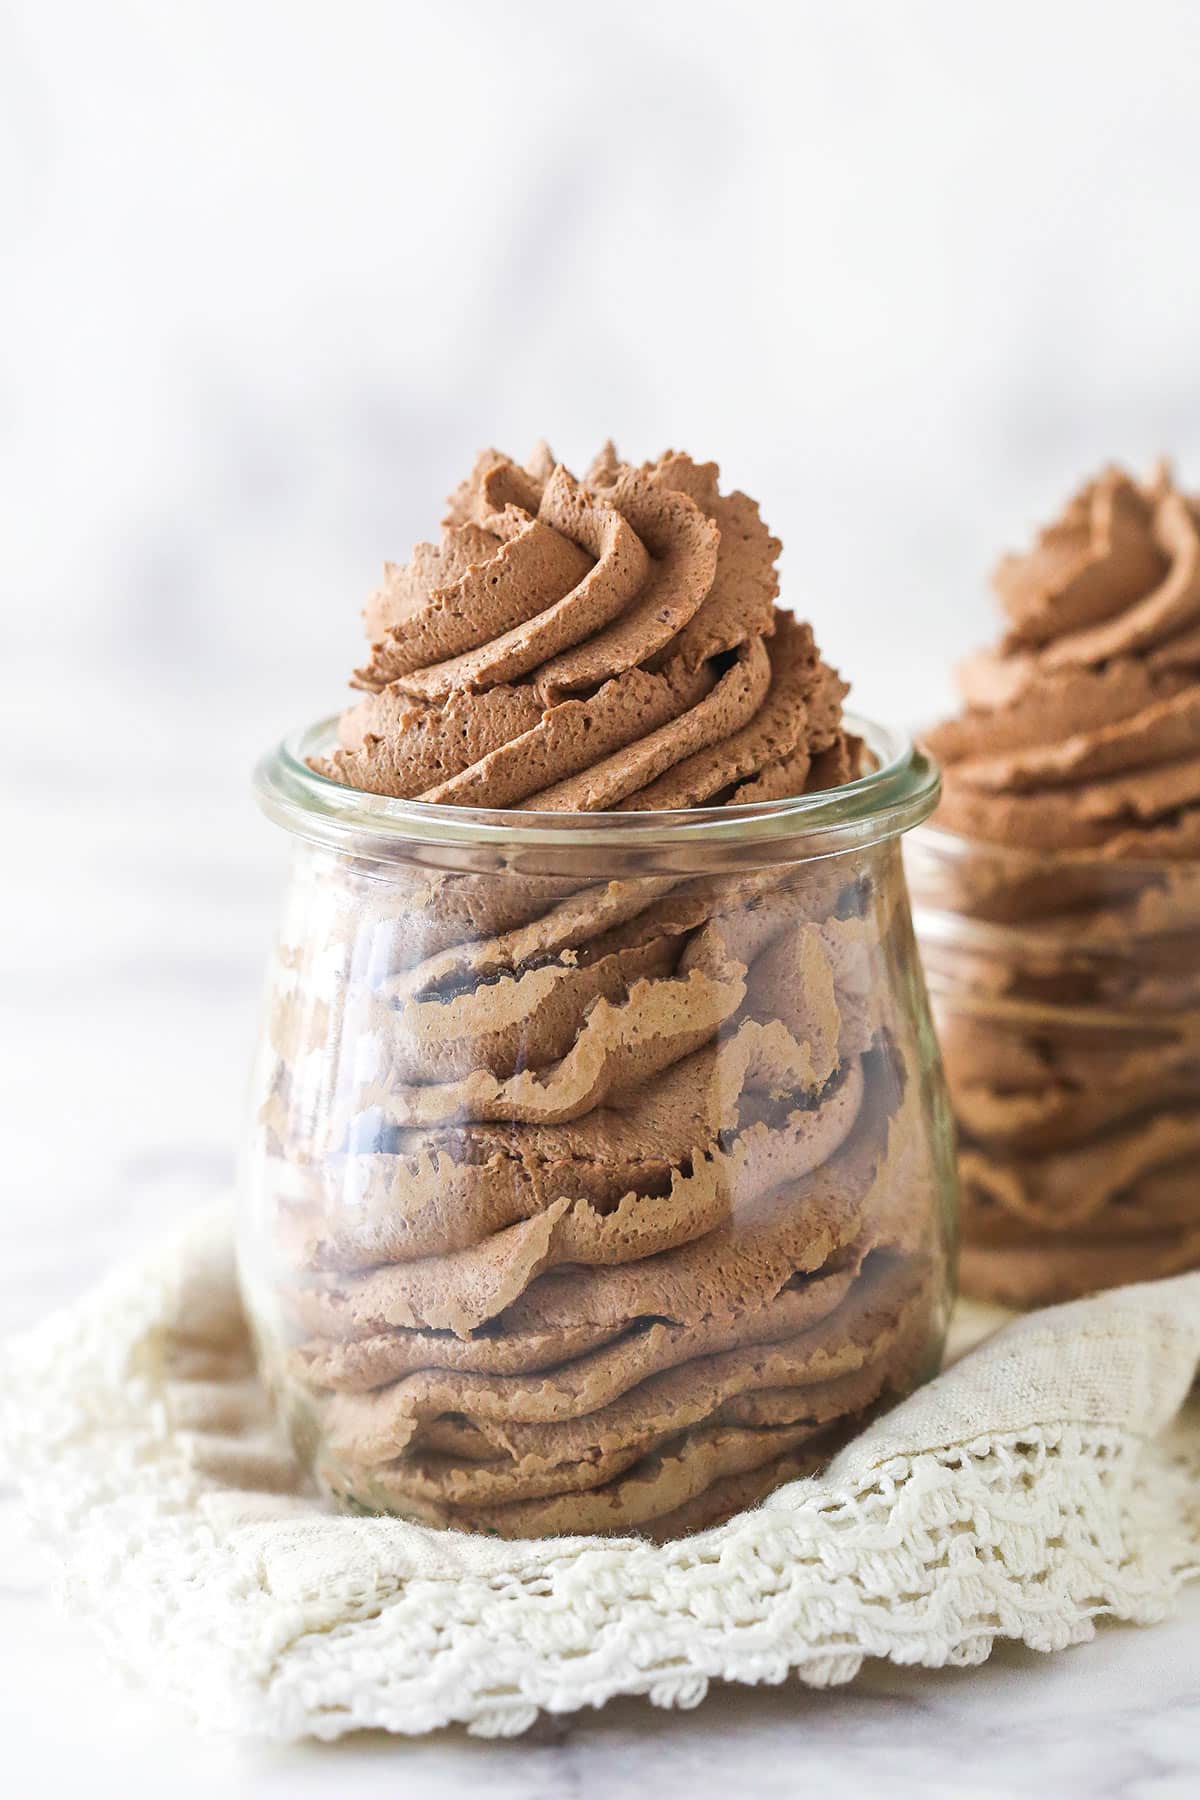 Chocolate whipped cream in a jar.